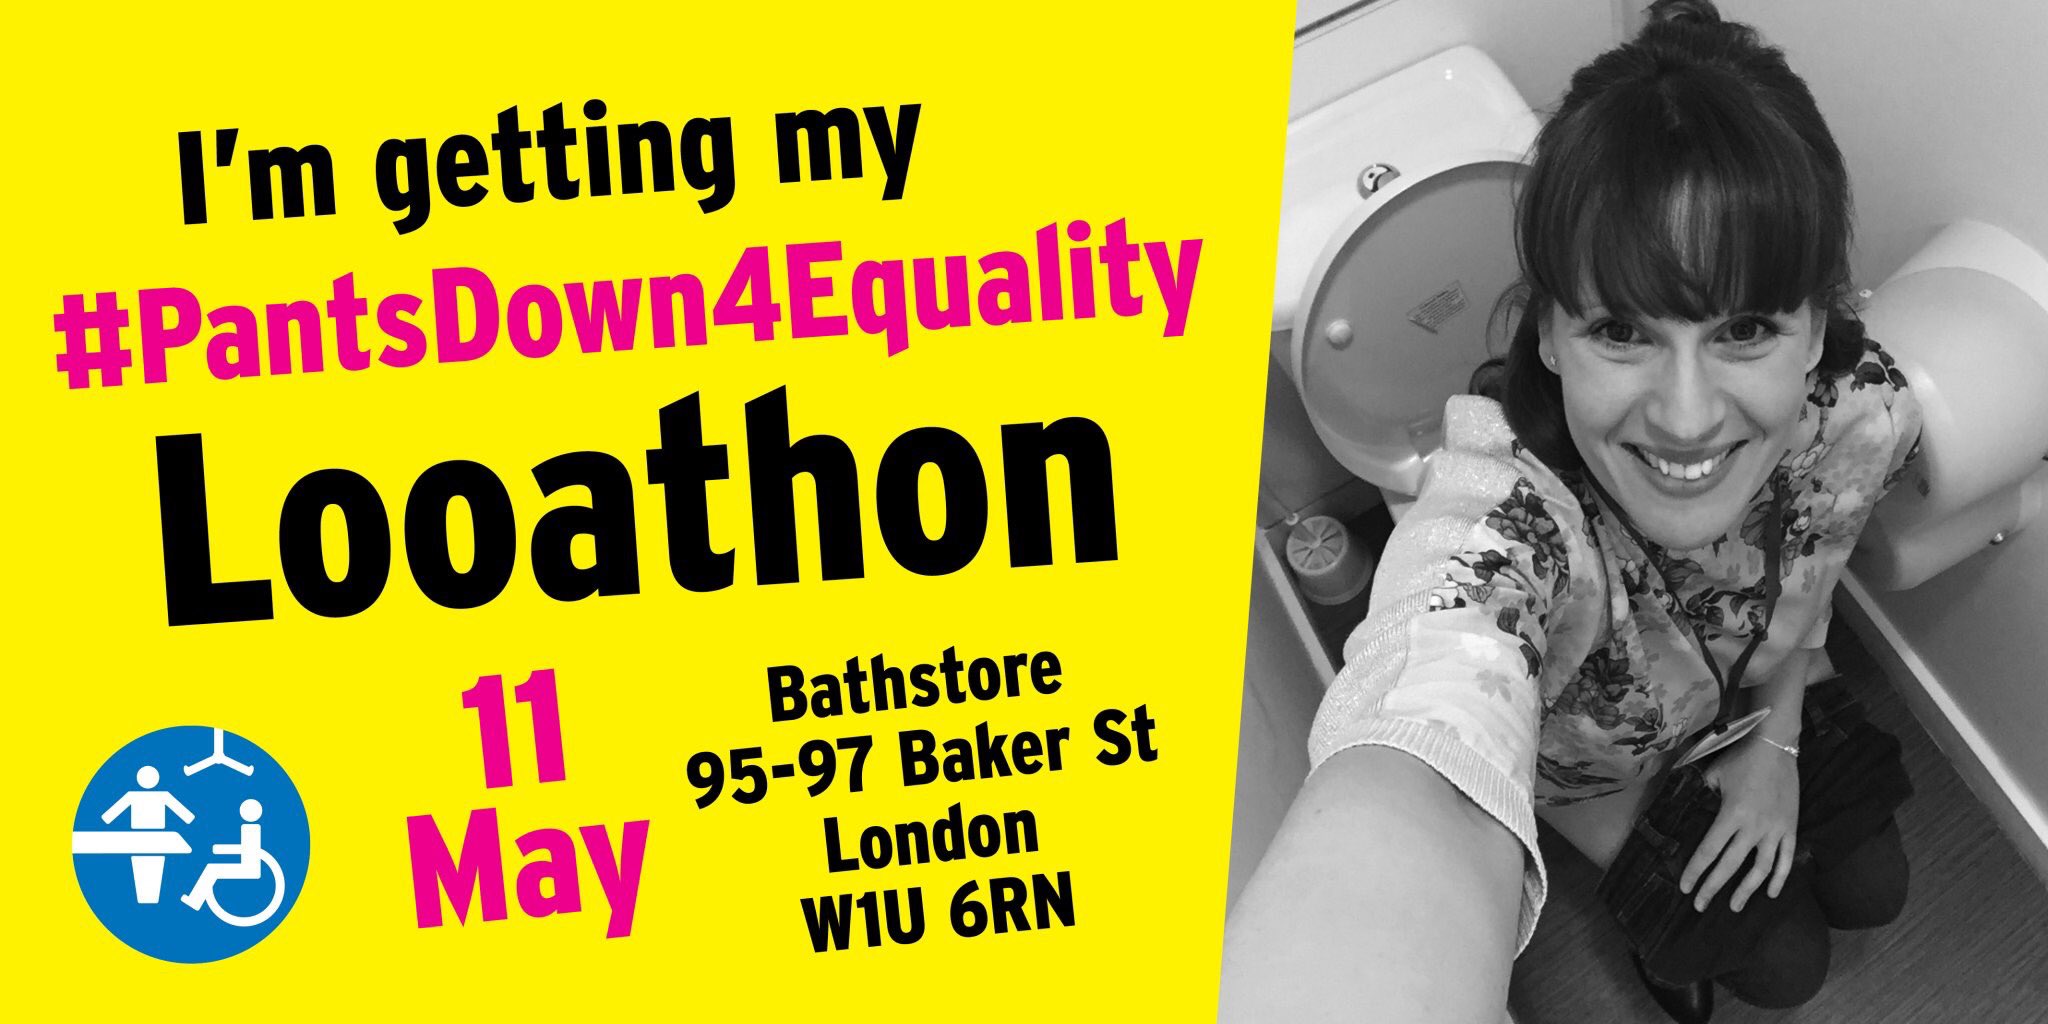 Advert for pants down for equality Looathon on 11th of May